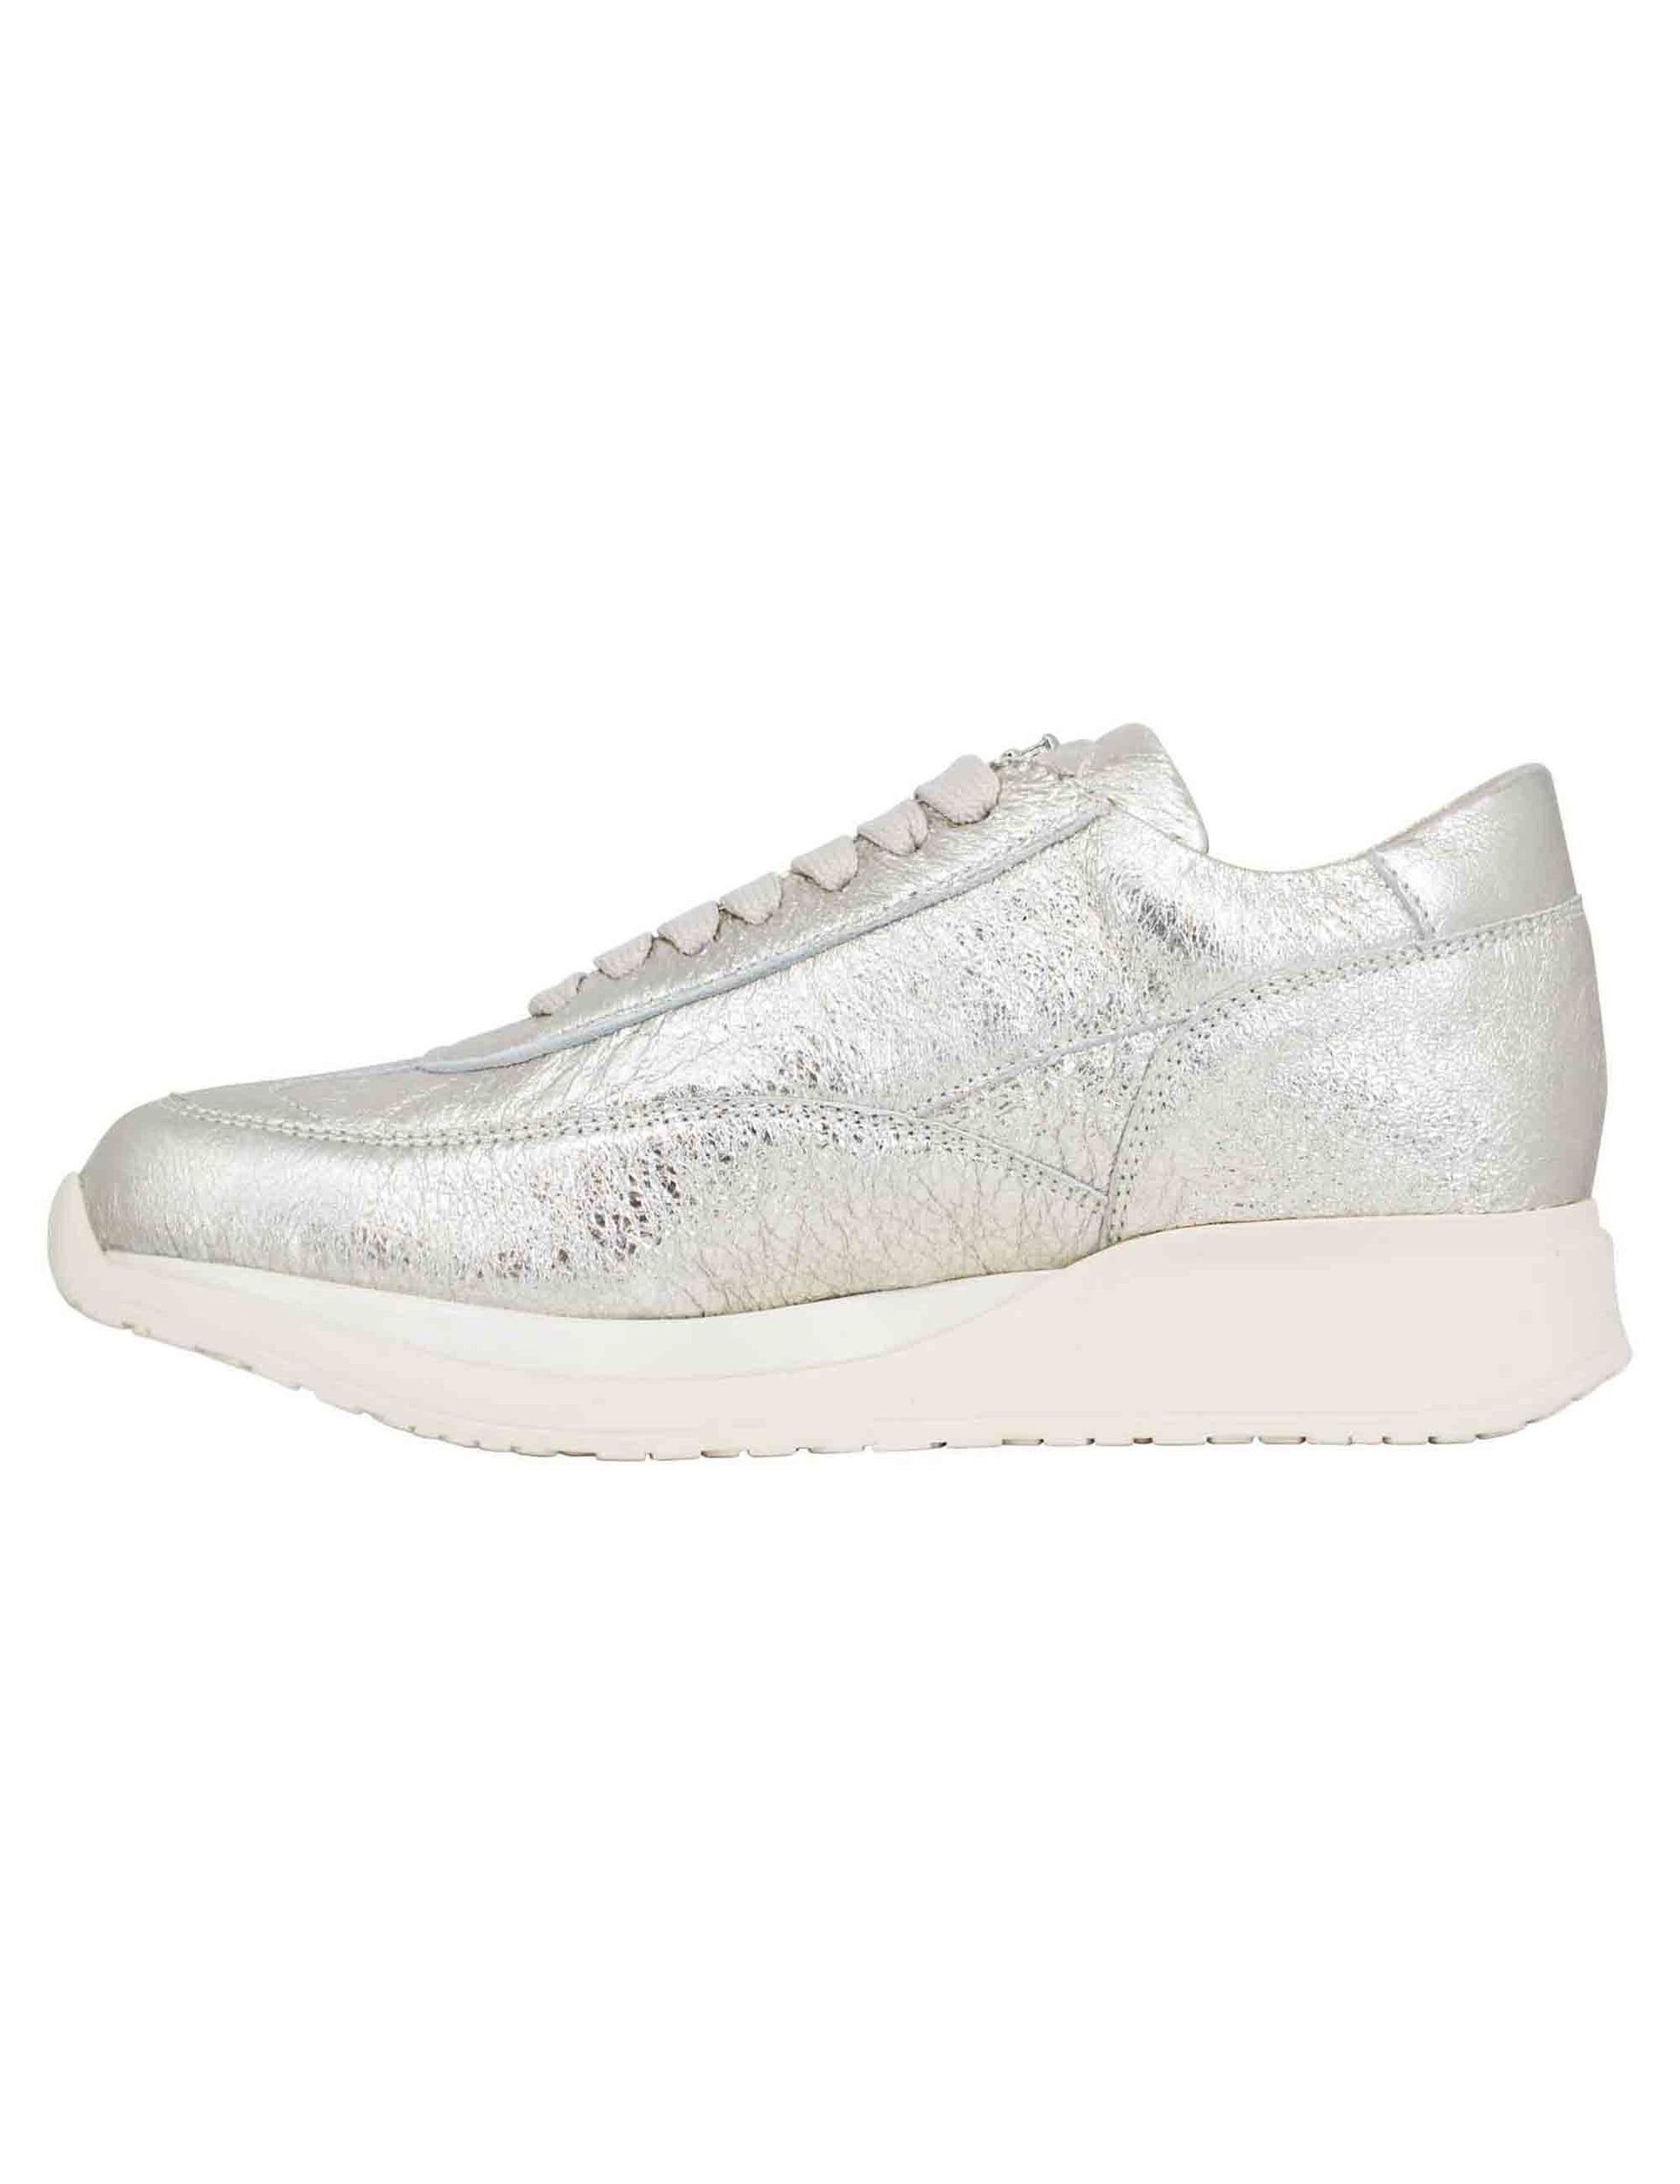 Women's sneakers in platinum laminated leather